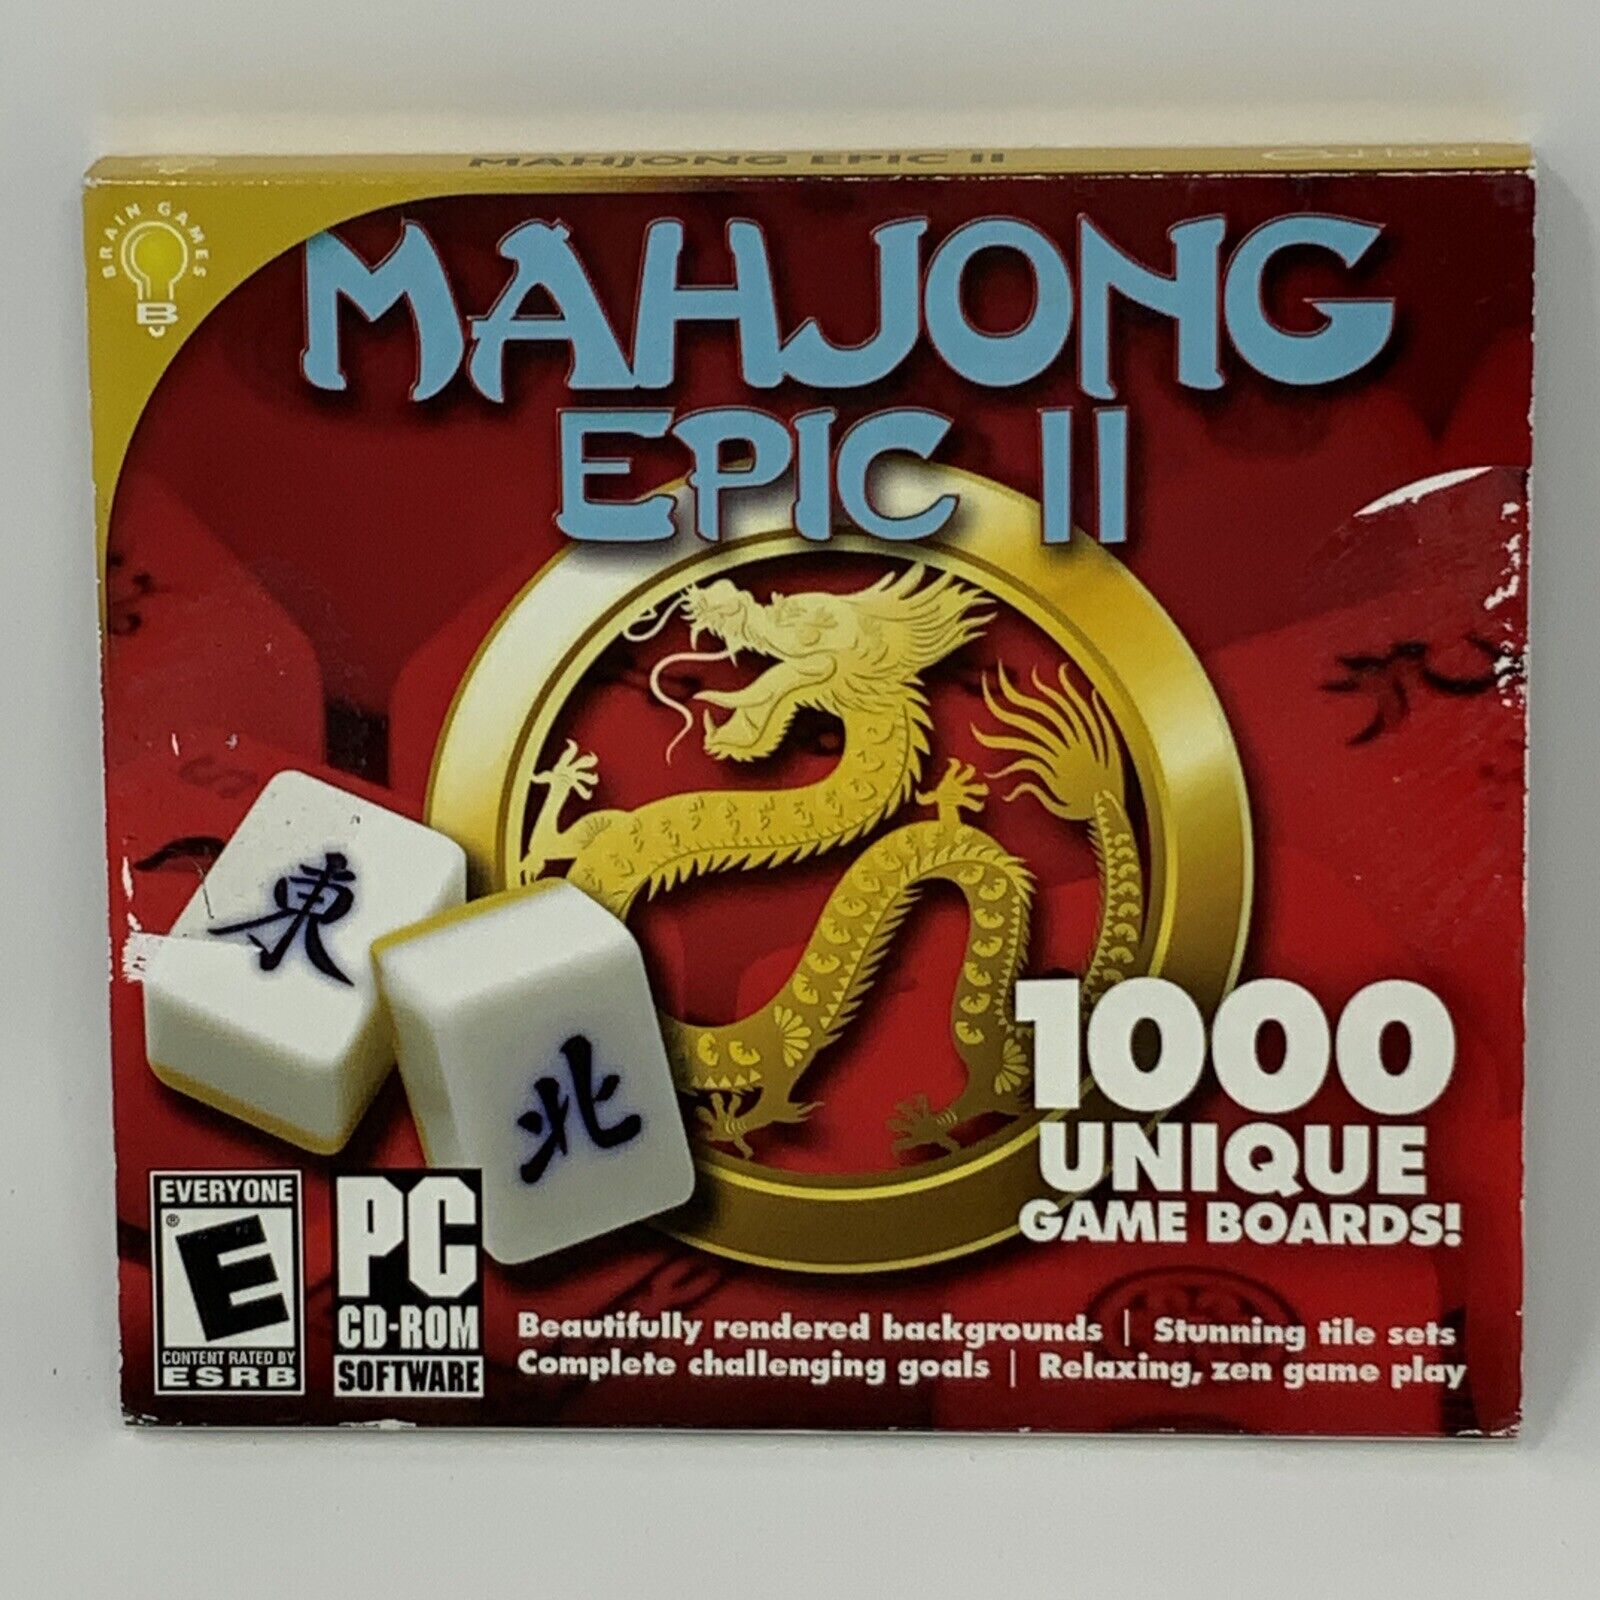 Mahjon Epic II 1000 Unique Game Boards PC CD Rom Game (Rated E)